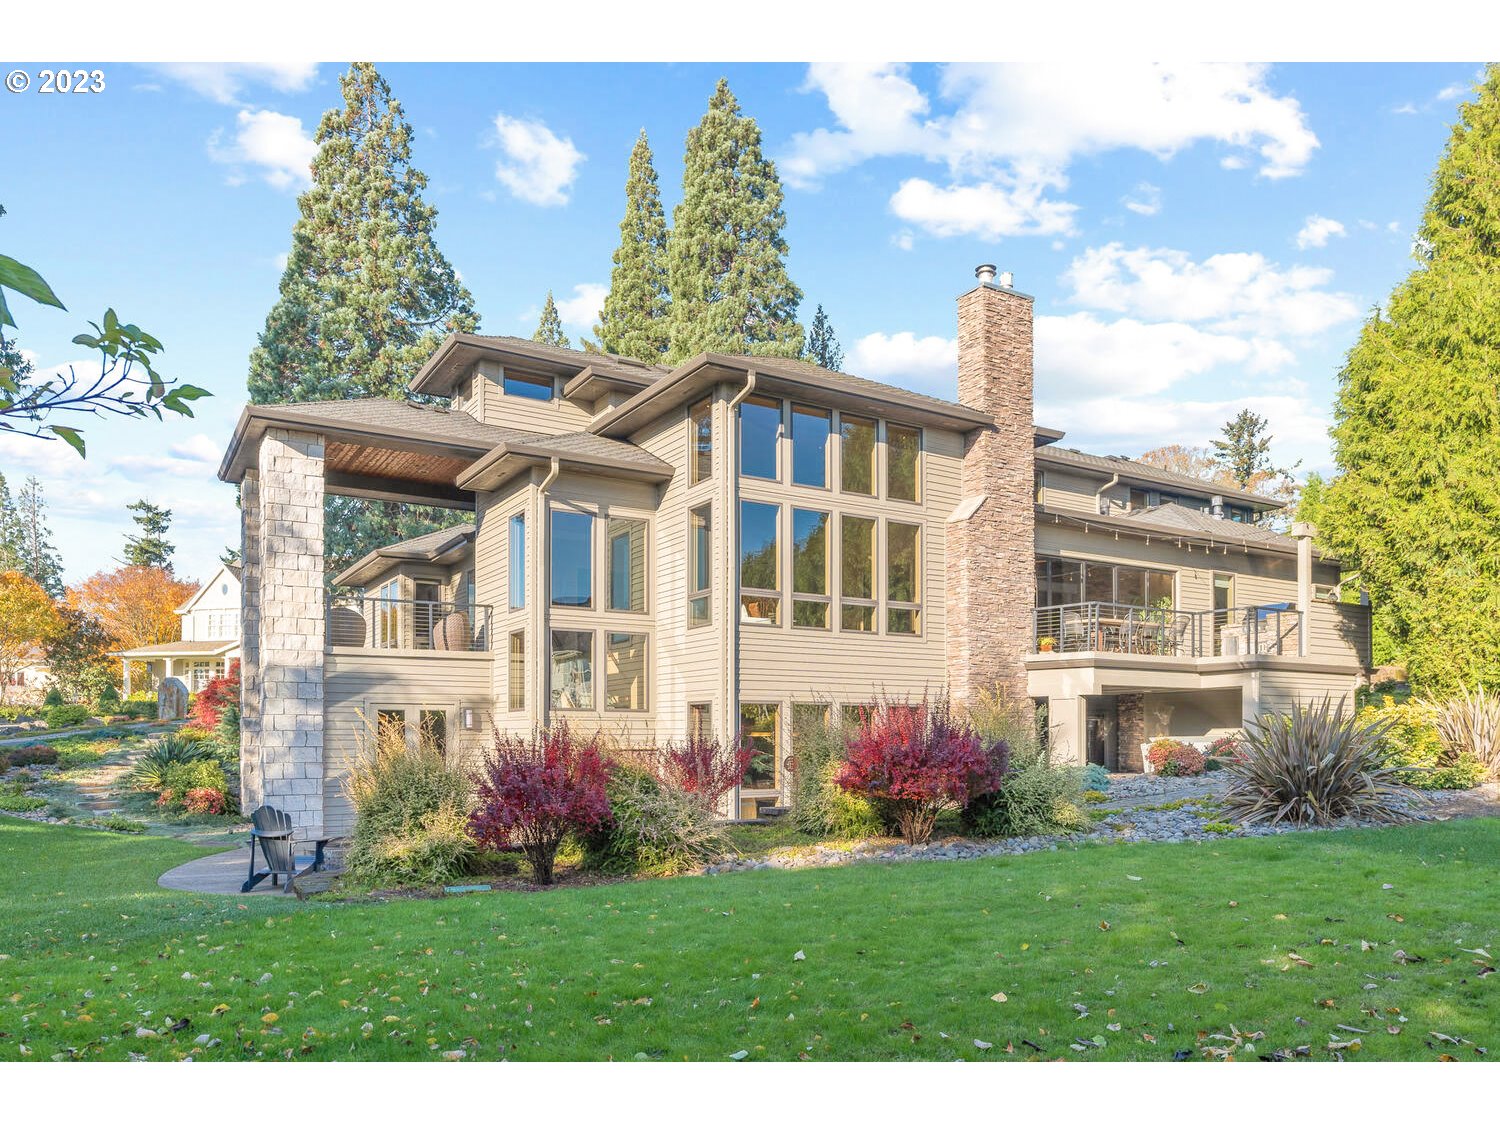 Custom built luxury stunner in the heart of Lake Oswego's sought-after Forest Highlands neighborhood with Mt Hood views, entire entertainer's floor with spa, billiards hall, home theater, elegant full bar, pickleball/sport court and offering wonderful privacy! Enter to a statement great room with every imaginable amenity from soaring 14-20' ceilings, floor to ceiling windows, radiant floor heat, fine stone and millwork, sleek contemporary lines, and fabulous indoor-to-outdoor sun room with fireplace for year round enjoyment. The holiday-ready dining room and polished gourmet kitchen feature luxe built-in features and cabinetry plus built-in espresso machine, desk, and cook's seating island. Enjoy true main level living in the sumptuous primary suite with spa bathroom, sunken tub, and vast dressing room. The main level study/library features a pass-through Mt Hood view and dual remote work stations. Upstairs find a beautifully appointed guest bedroom suite, two bedrooms sharing a jack and jill bathroom, and a full guest or in-laws suite with bedroom, bathroom, private balcony, kitchen, and nearby elevator shaft to the garage. Fitness studio, wine cellar, poker room, and an epic sound system with destination covered patio and view decks check all the boxes and then some in this magical property. The immaculate grounds offer a full sport court, fire pit, and motor court with collector's 4 car extended garages. This Masterfully built refuge near top Lake Oswego Schools, championship golf, New Seasons Market cafes, and shopping is the consummate in the executive living and ideally situated on .65 acres in Portland's most desirable suburb!